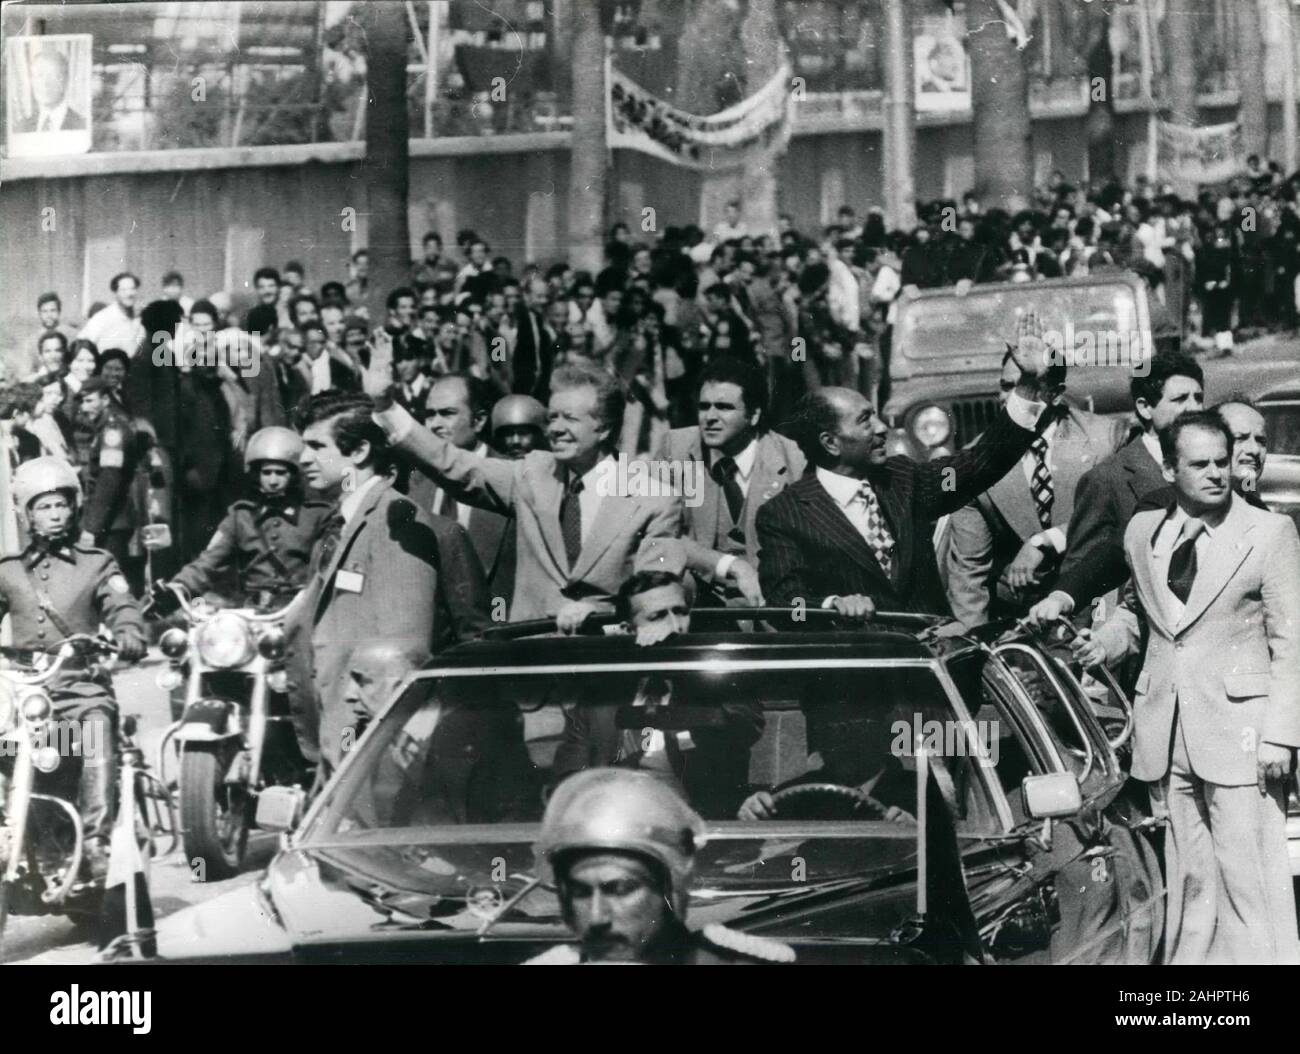 Mar. 8, 1979 - Cairo, Egypt - US President JIMMY CARTER and Egyptian President ANWAR SADAT stand through the roof of a limo and wave to the crowds during the drive from the airport into Cairo. President Carter arrived in Egypt to meet with President Sadat and address the People's Assembly. (Credit Image: © Keystone Press Agency/Keystone USA via ZUMAPRESS.com) Stock Photo